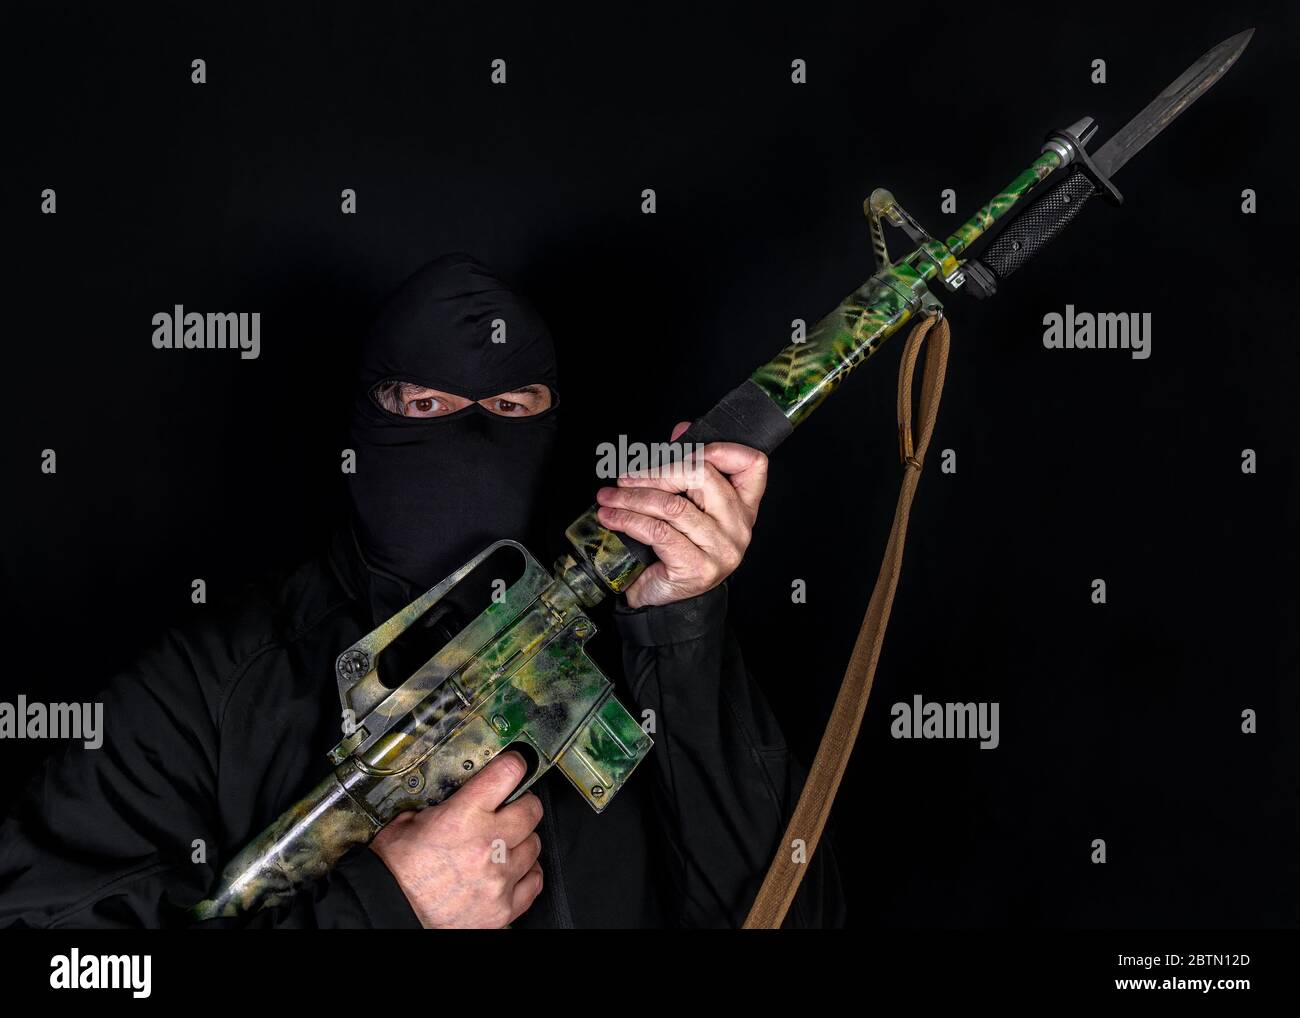 A terrorist holding an assault rifle. The rifle is camouflage color and has a bayonet. Terrorist wears dark black hood and jacket. Black background. Stock Photo